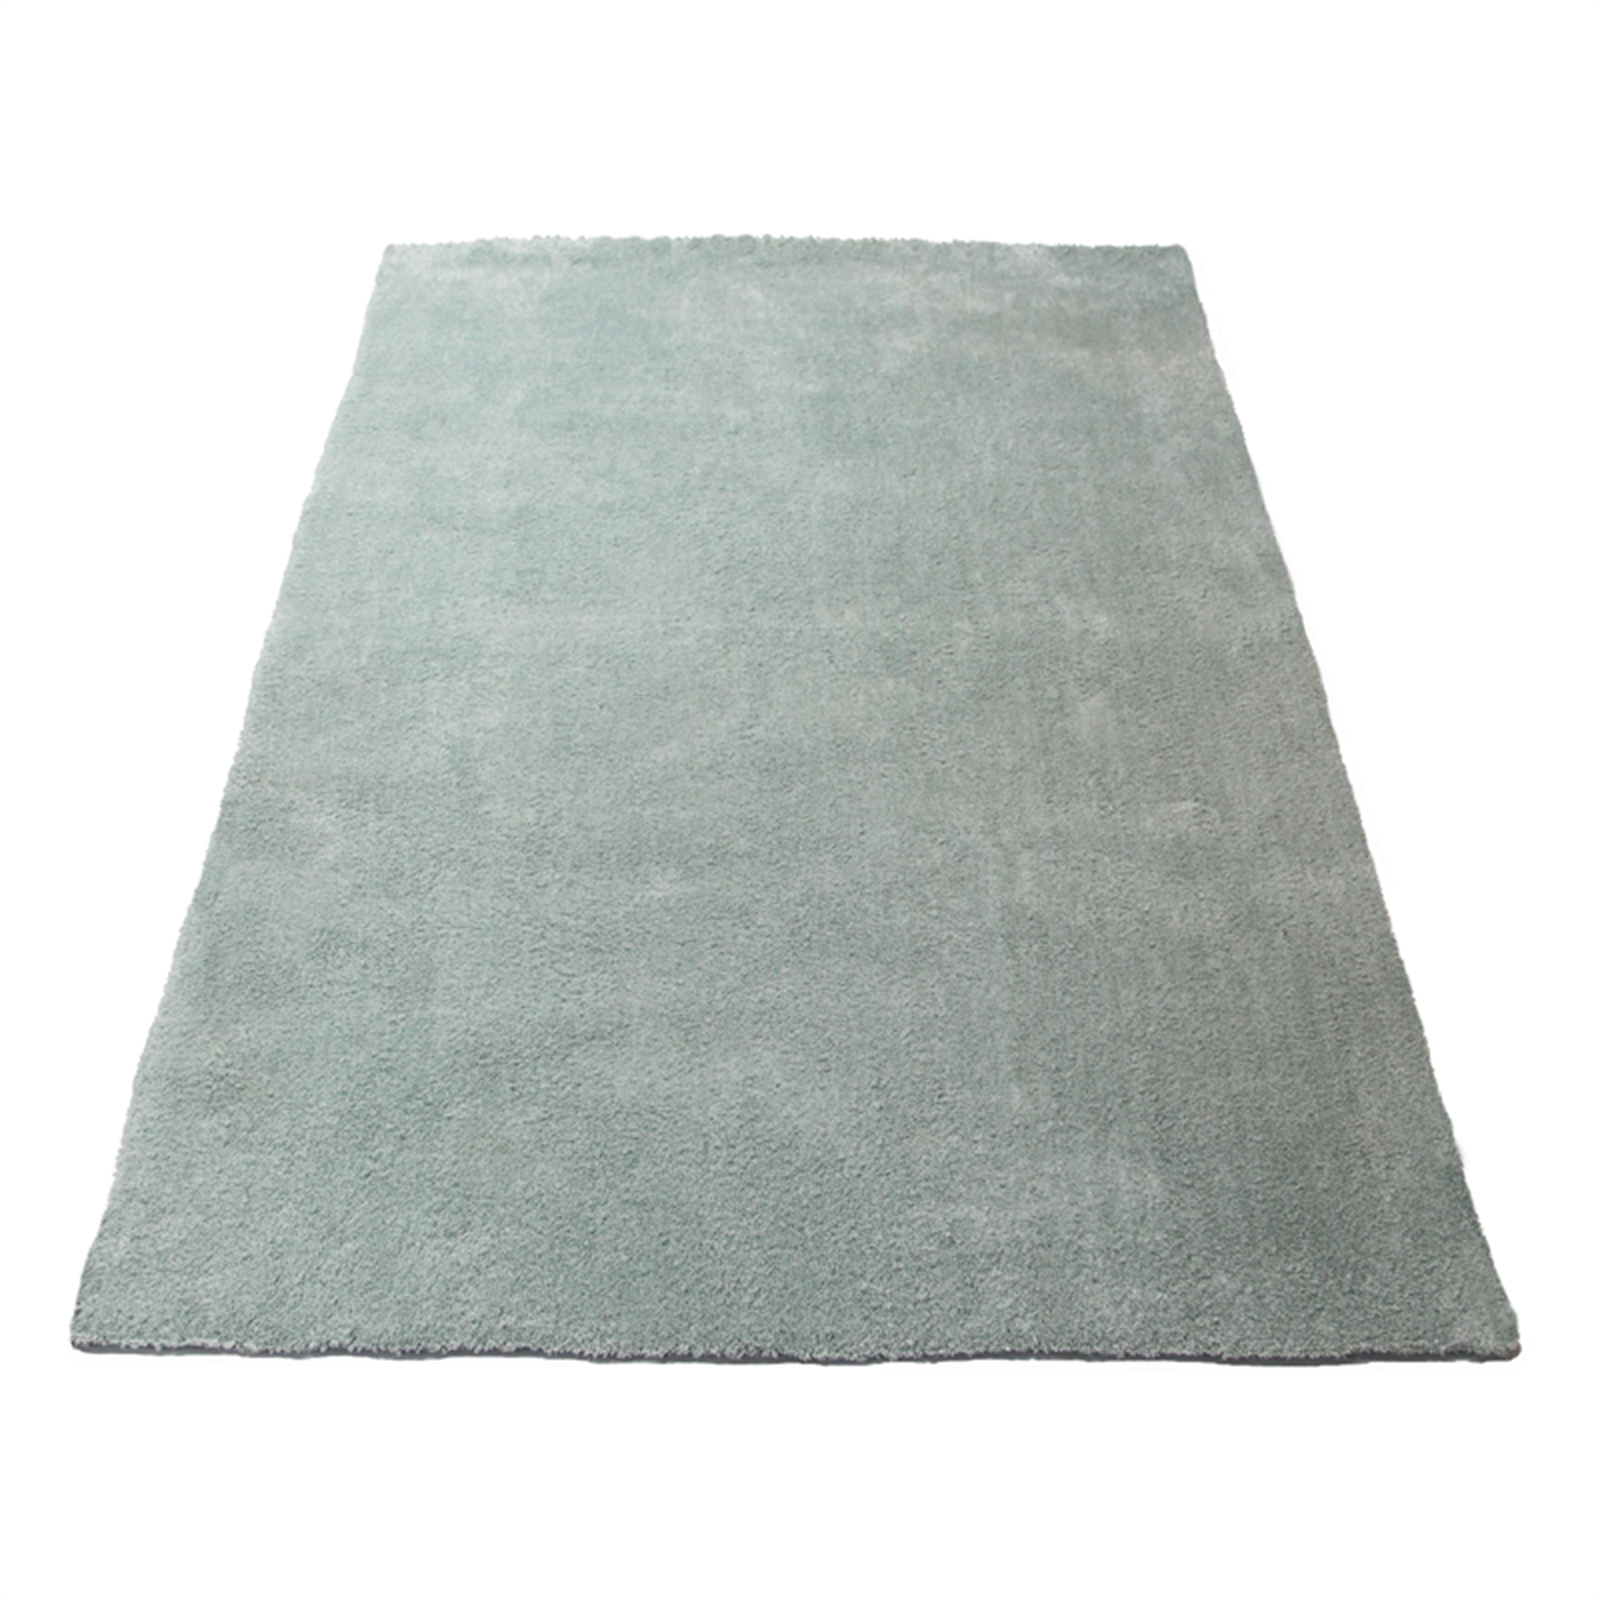 The Estate Collection 200 x 290cm Mint Berlin Rug